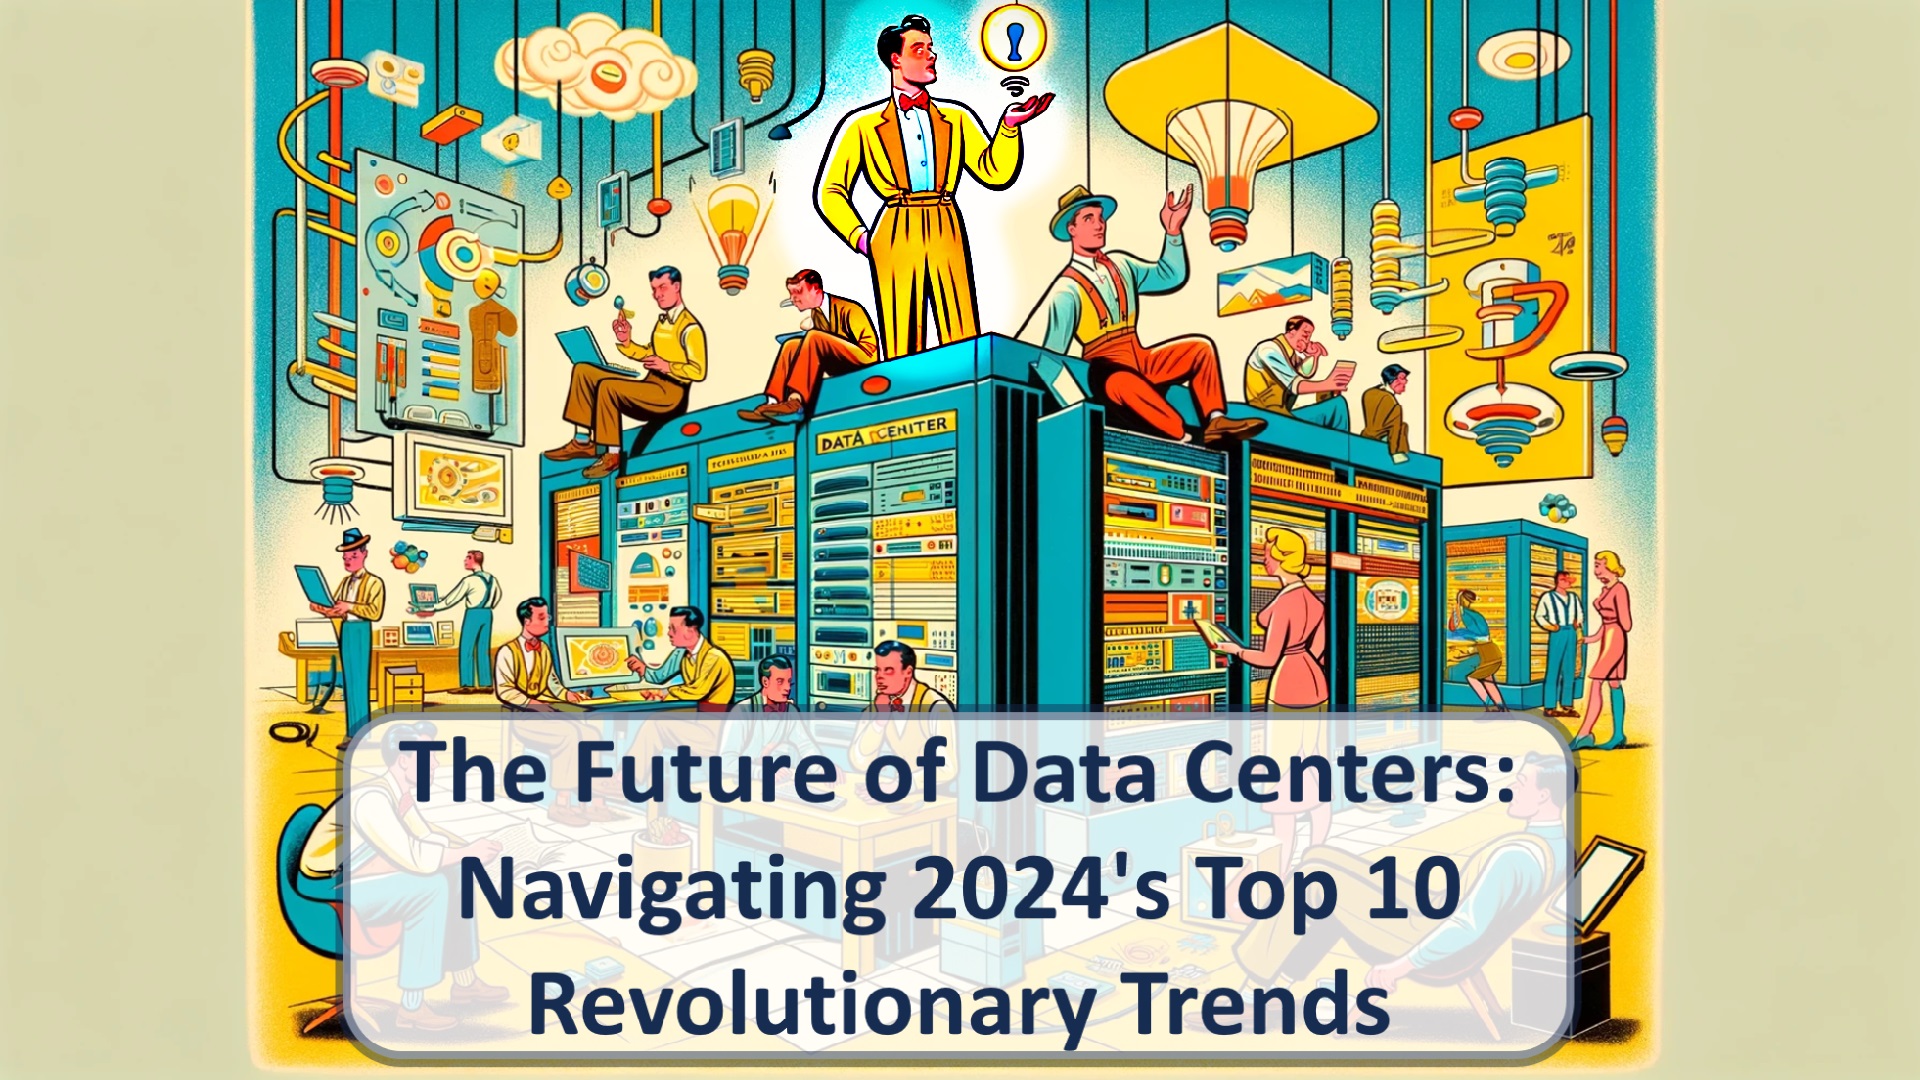 The Future of Data Centers: Navigating 2024's Top 10 Revolutionary Trends